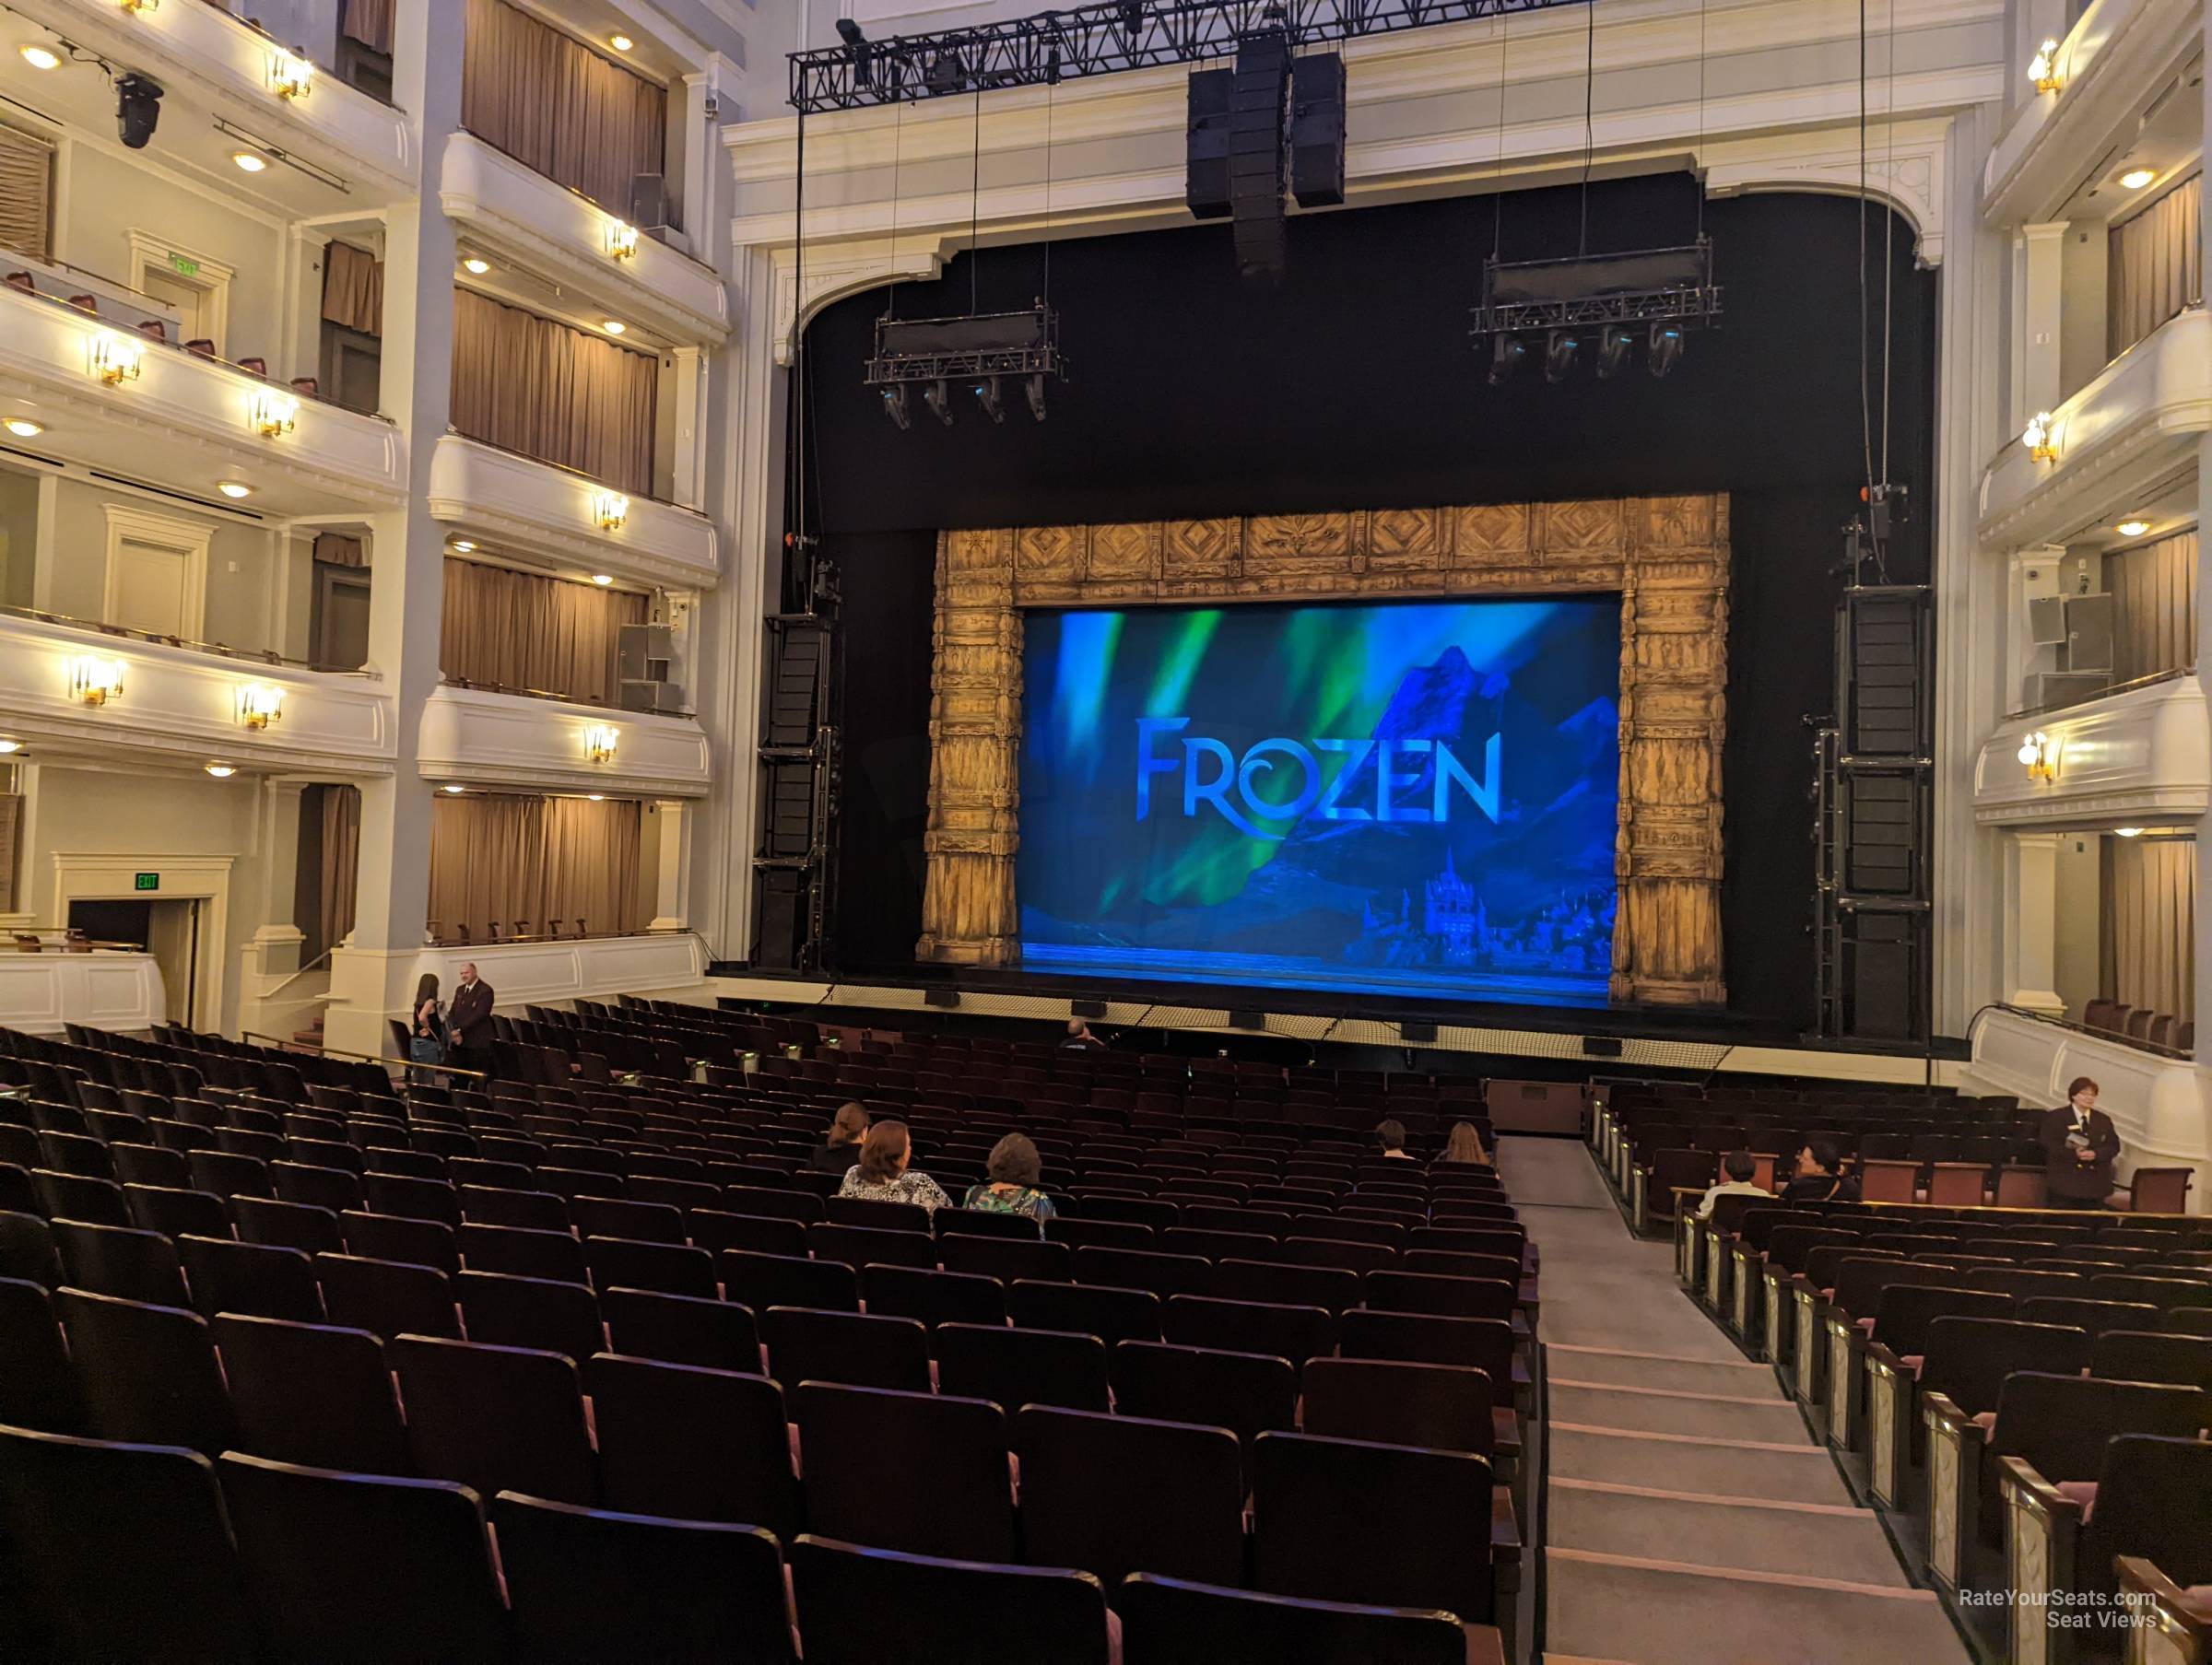 orchestra center, row r seat view  - bass performance hall